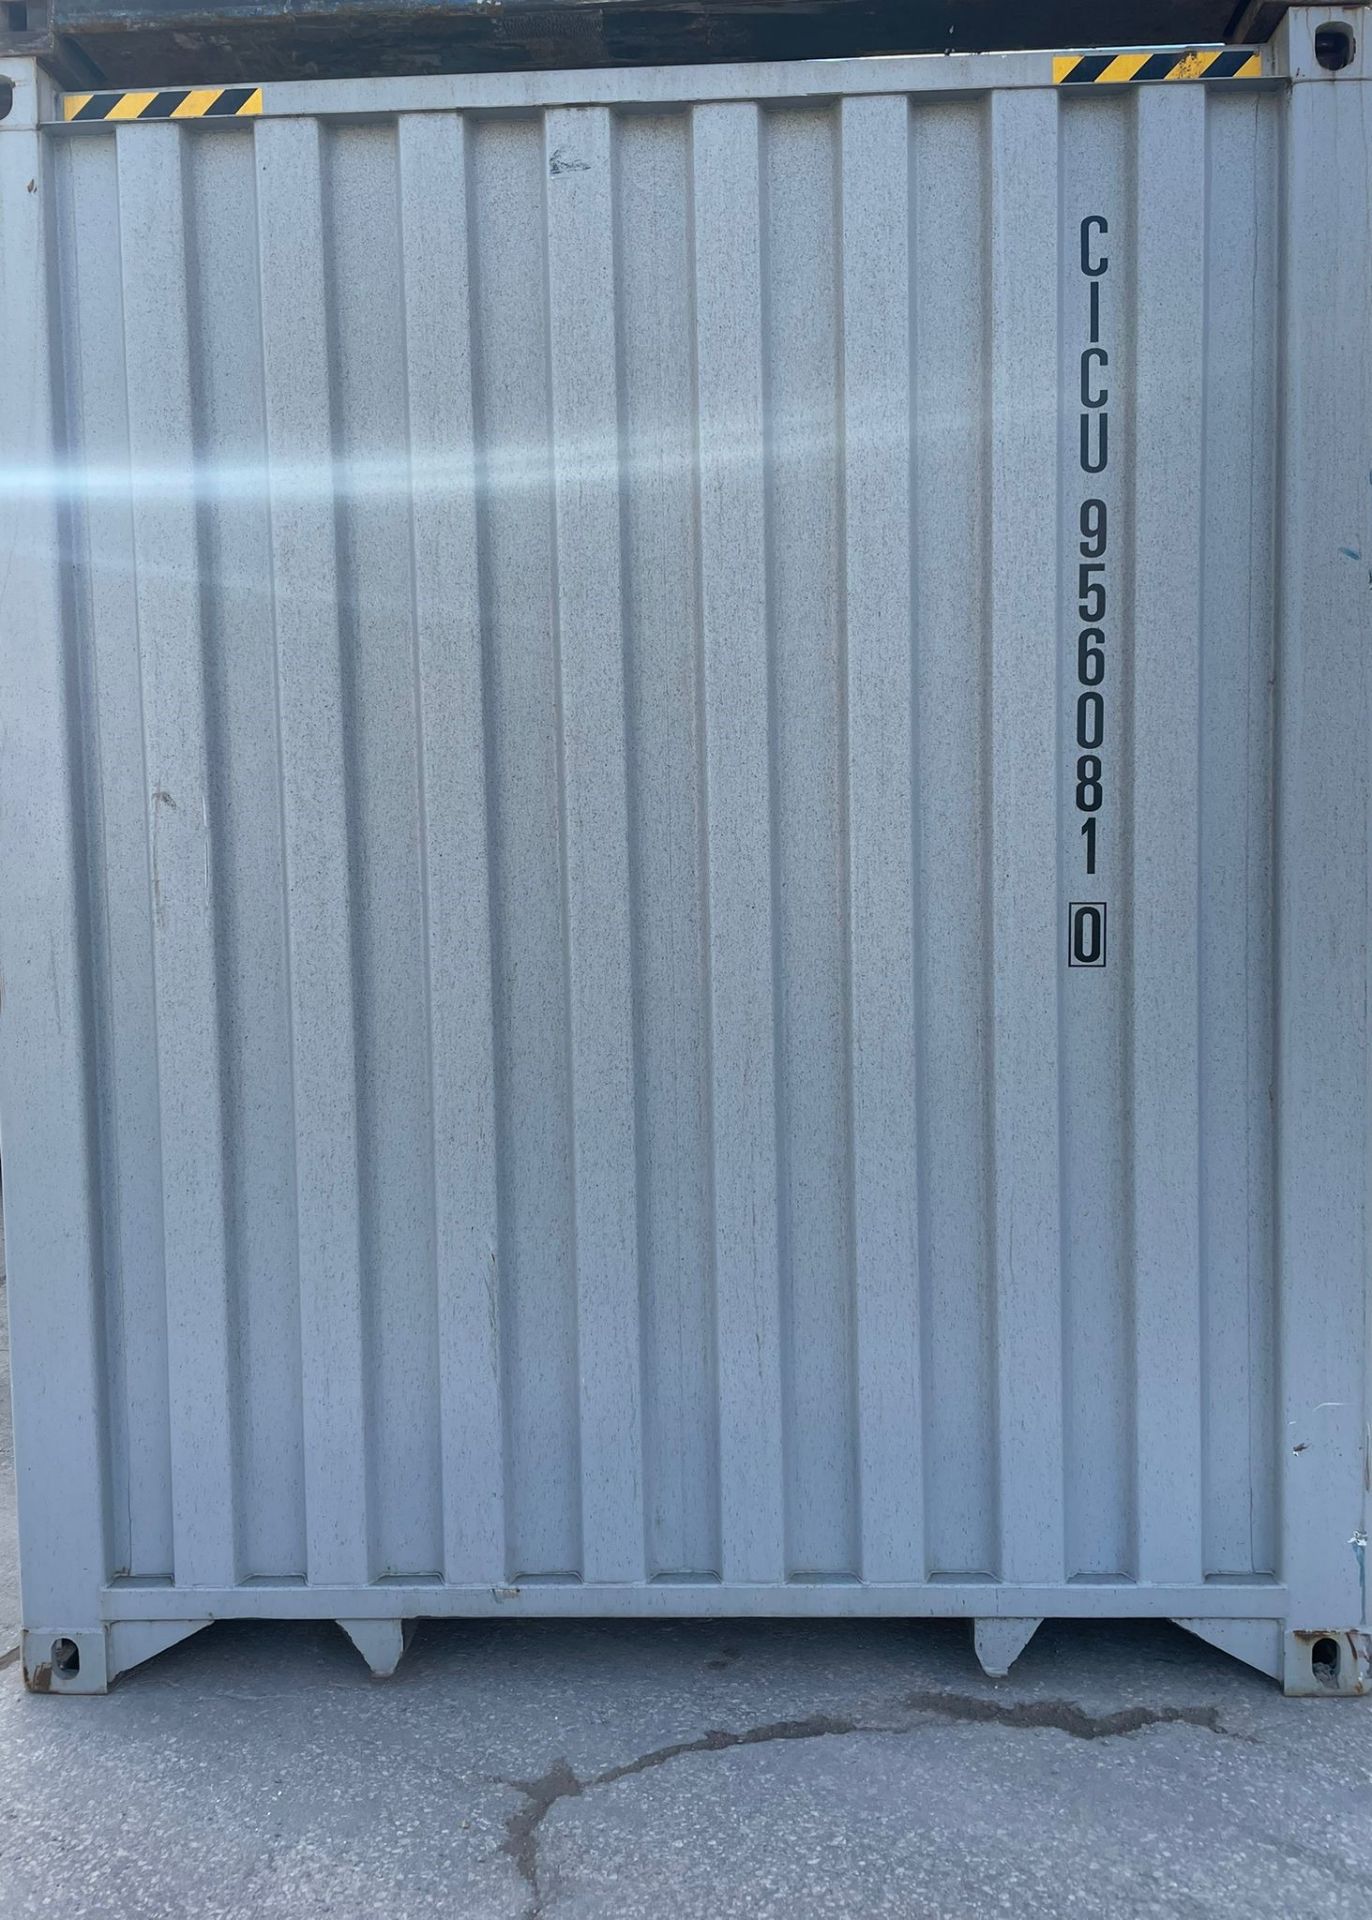 40ft HC Shipping Container - ref CICU9560810 - Image 6 of 6